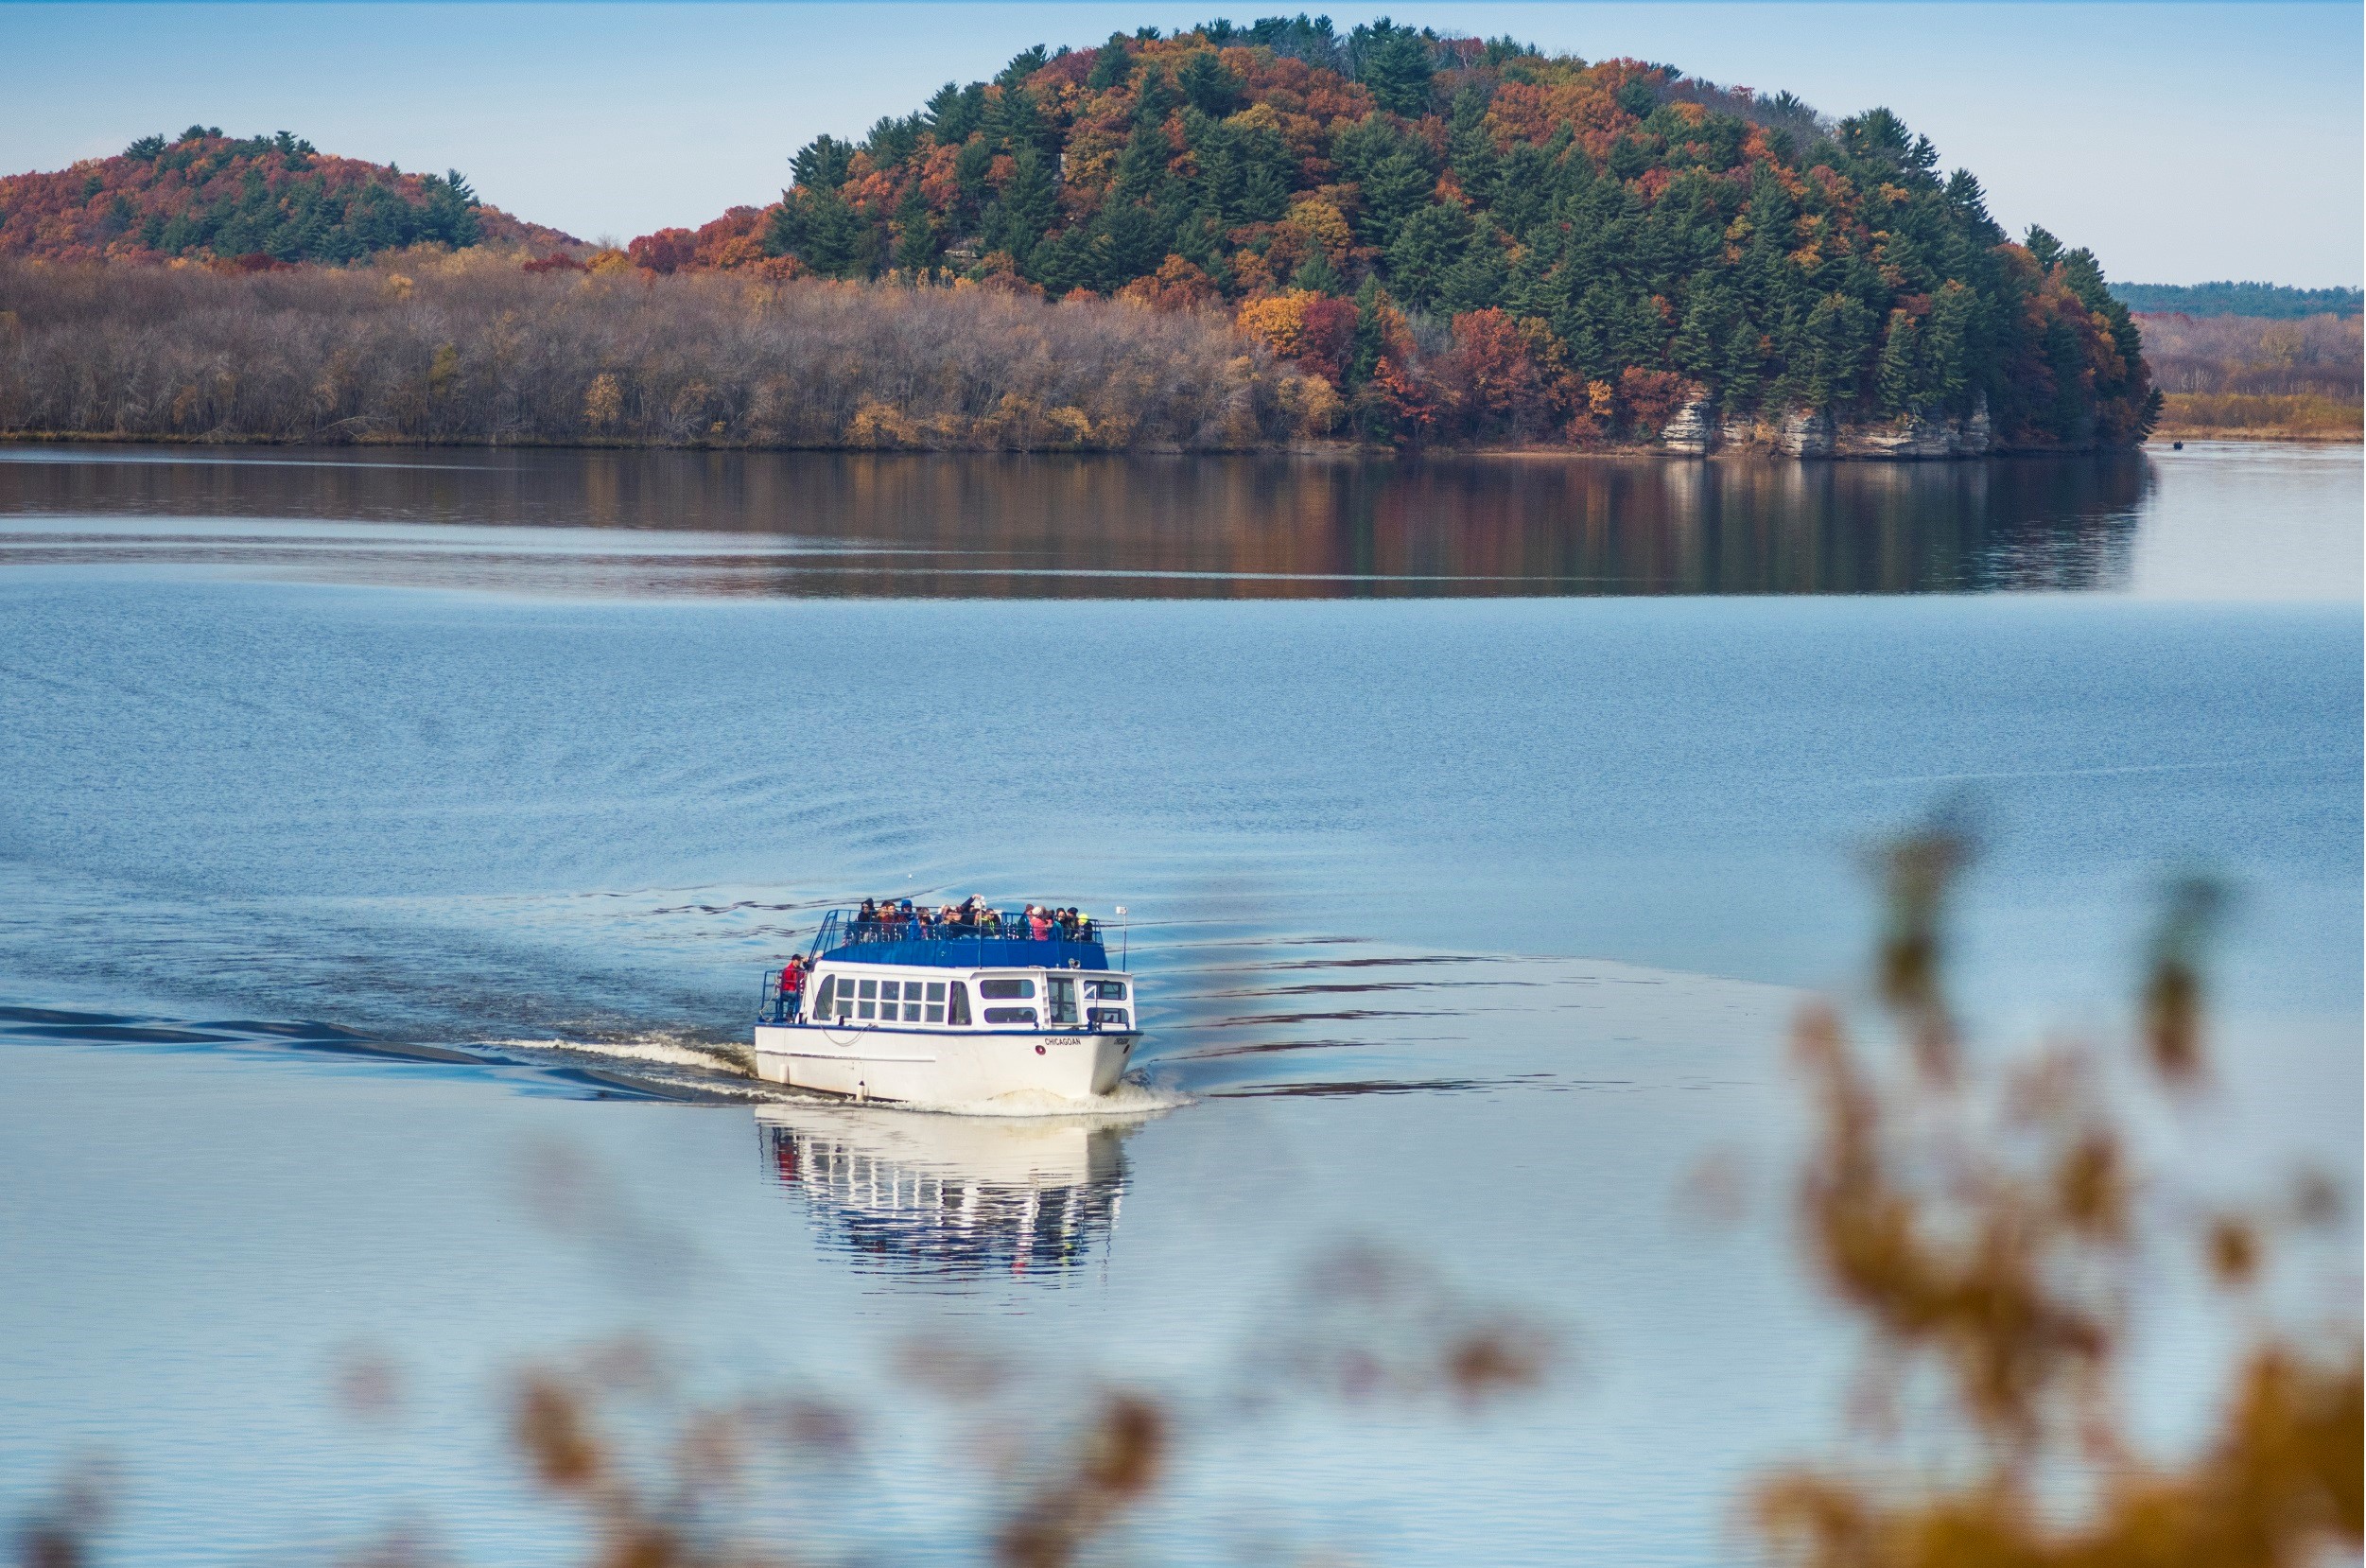 Clear fall days make for great viewing of fall color along the Wisconsin River in Wisconsin Dells.